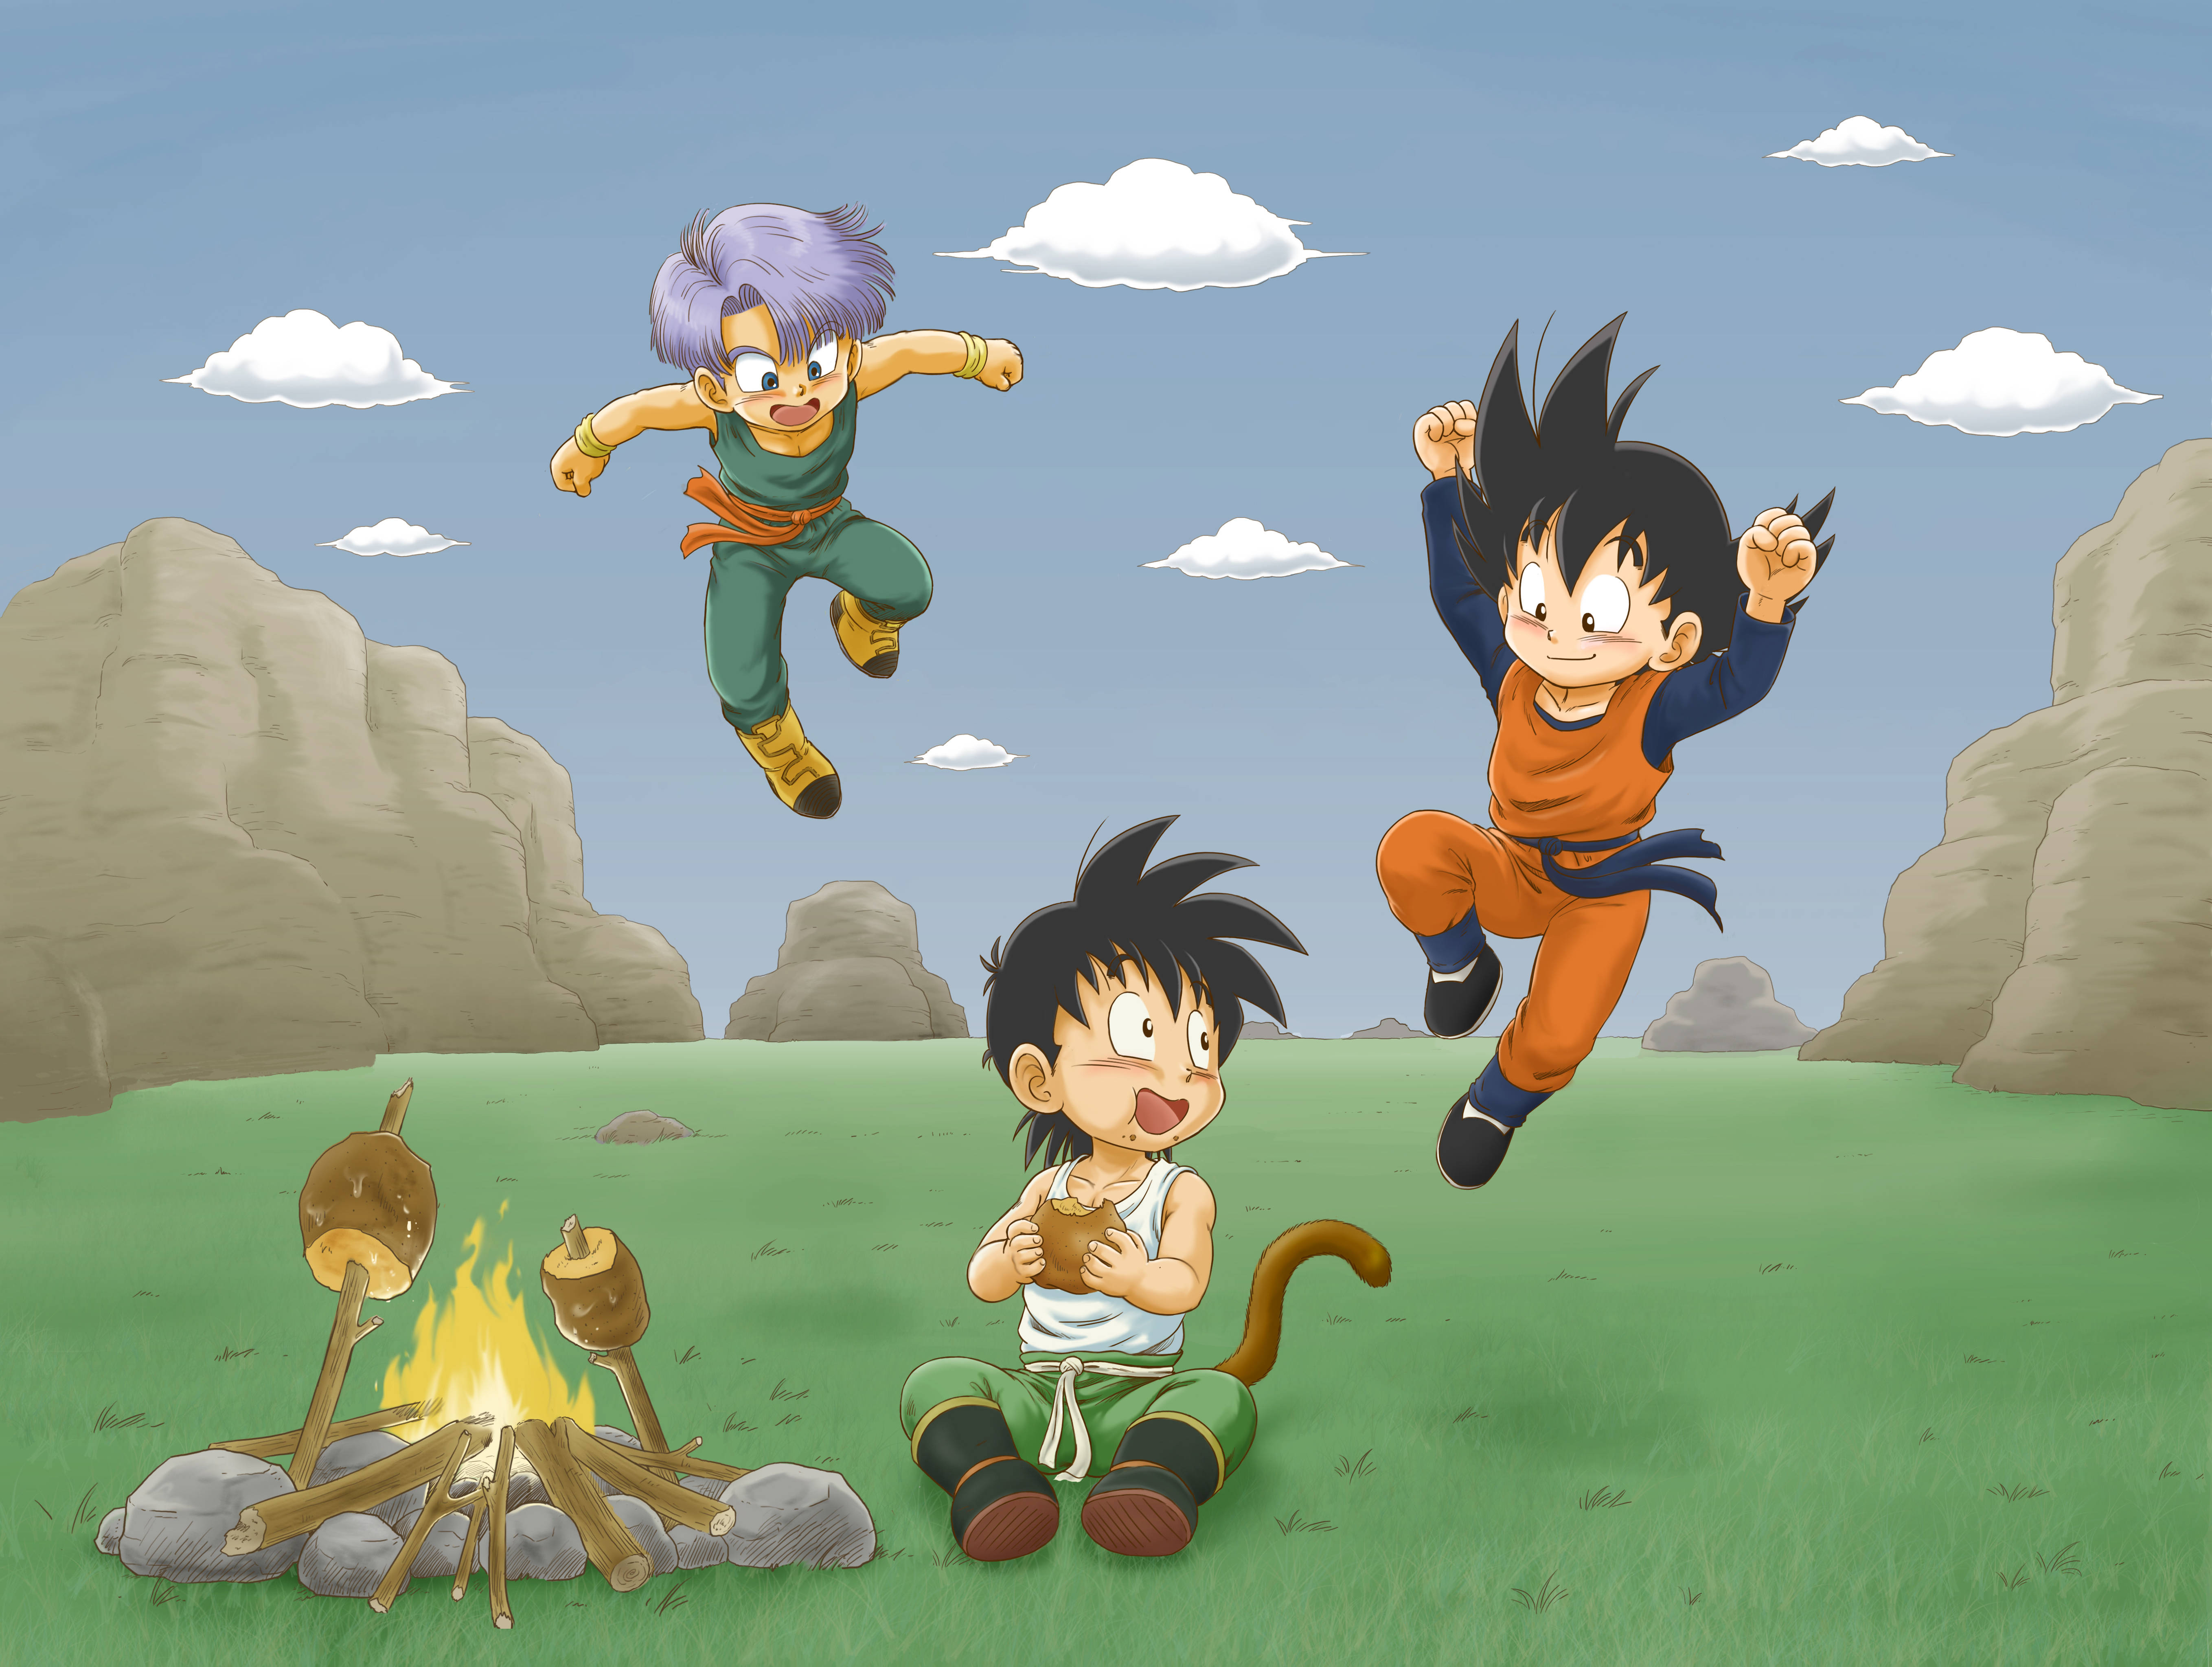 Trunk And Goten Computer Wallpapers Desktop Backgrounds  Goten Trunks  Mighty Mask  Free Transparent PNG Download  PNGkey